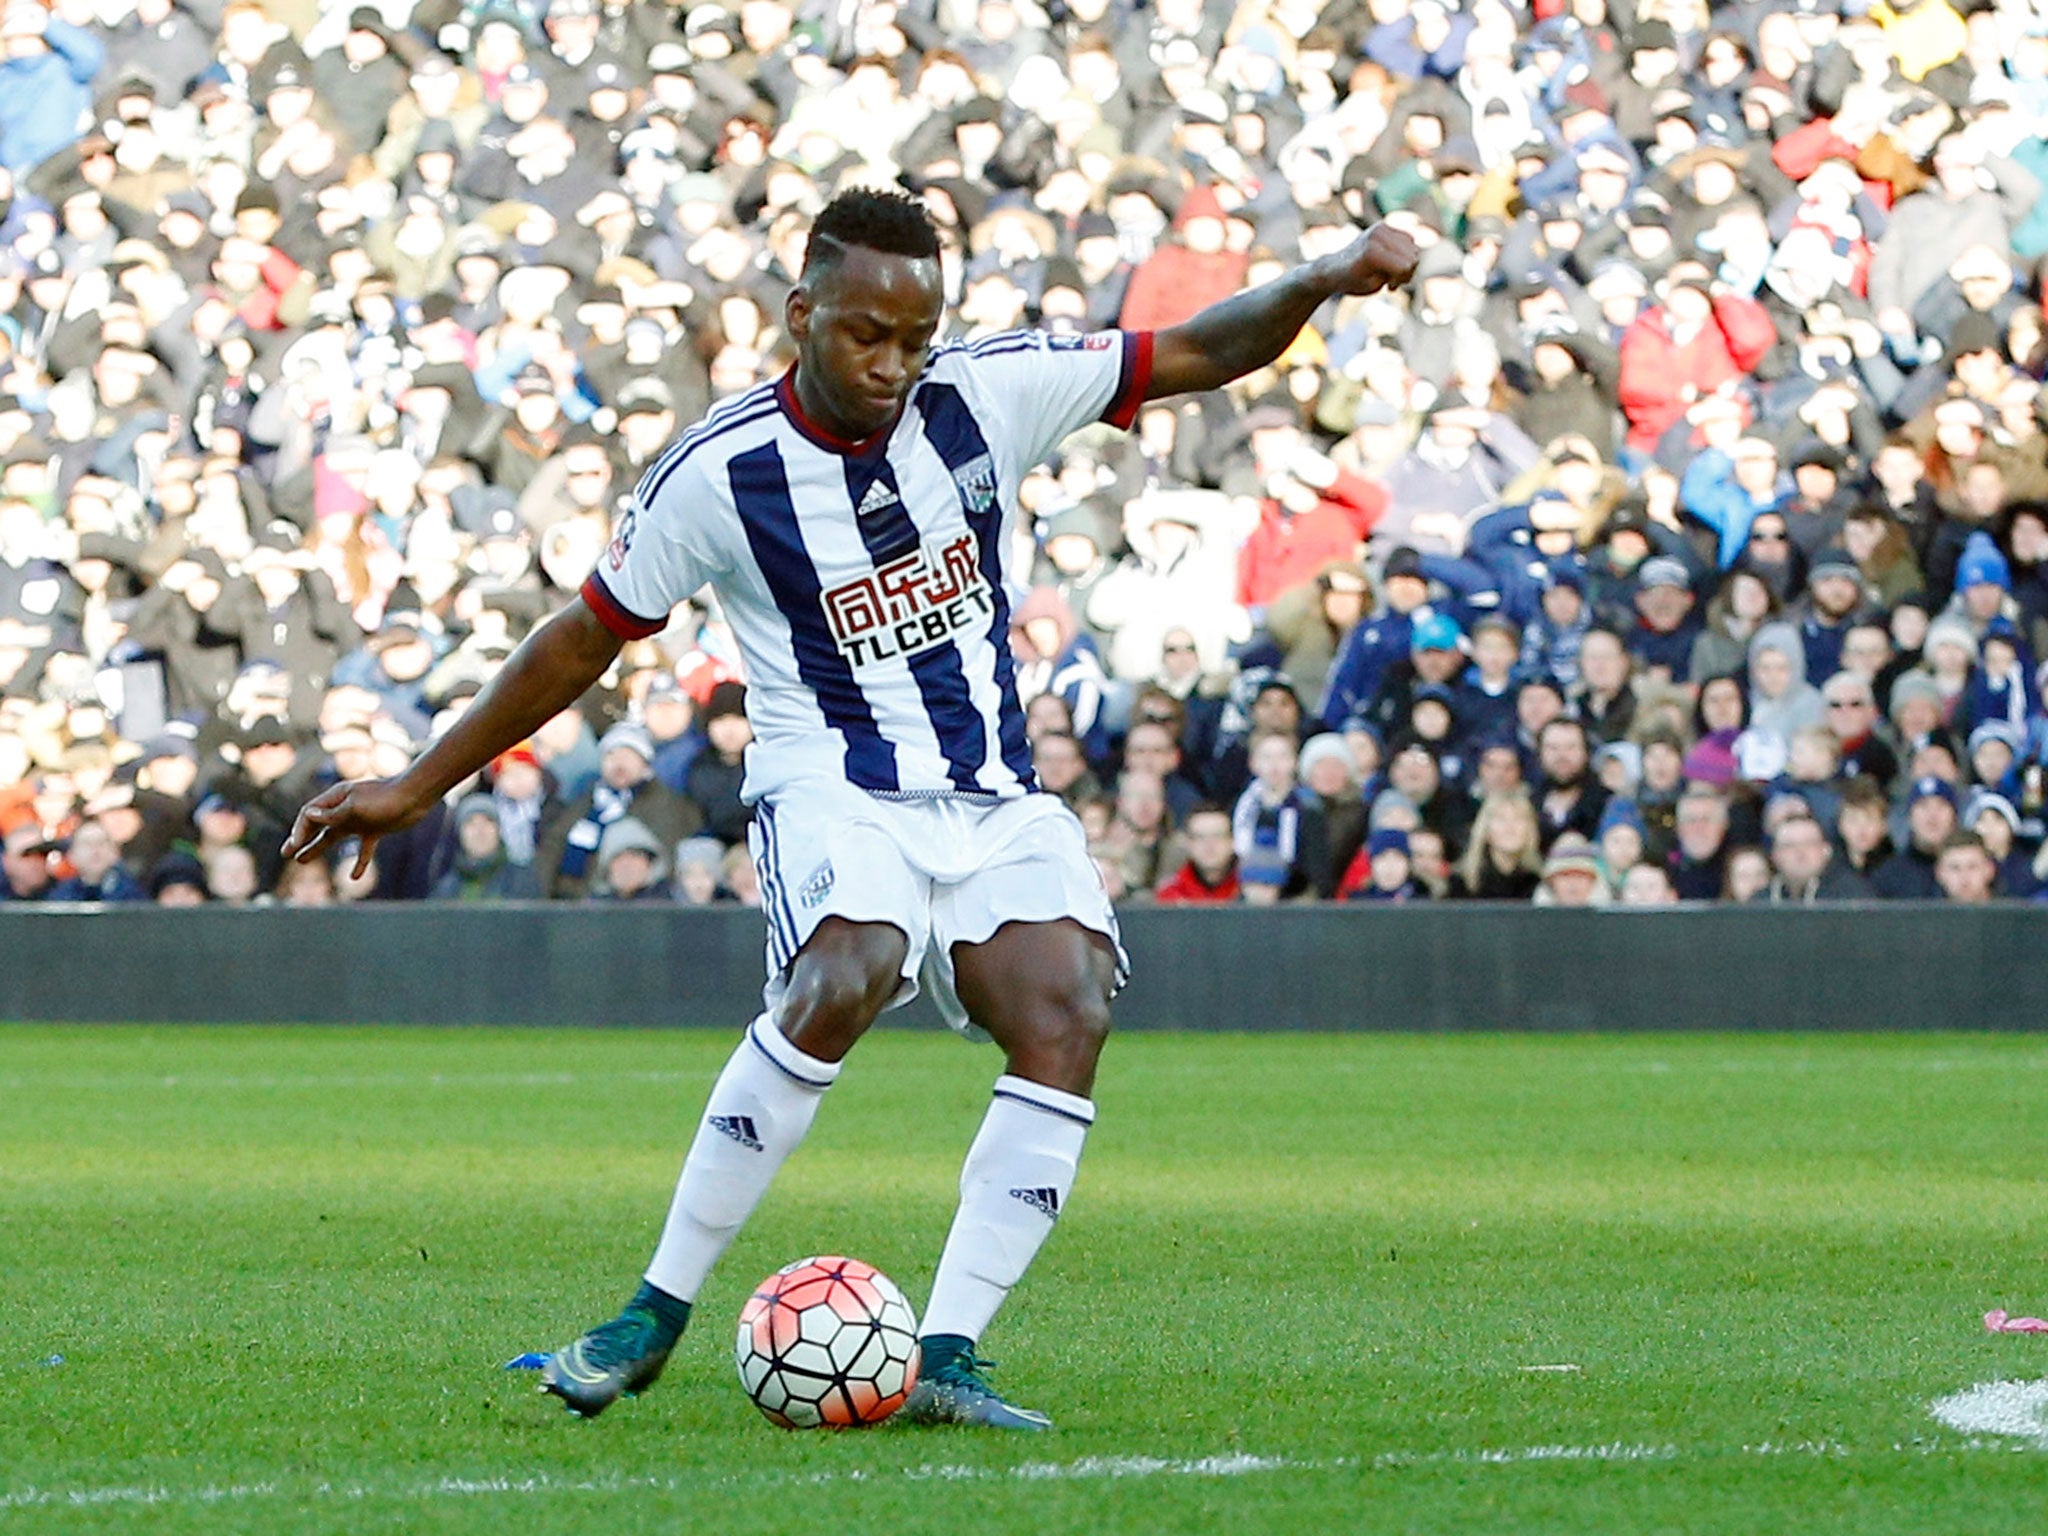 Saido Berahino scores the first of his two goals against Peterborough